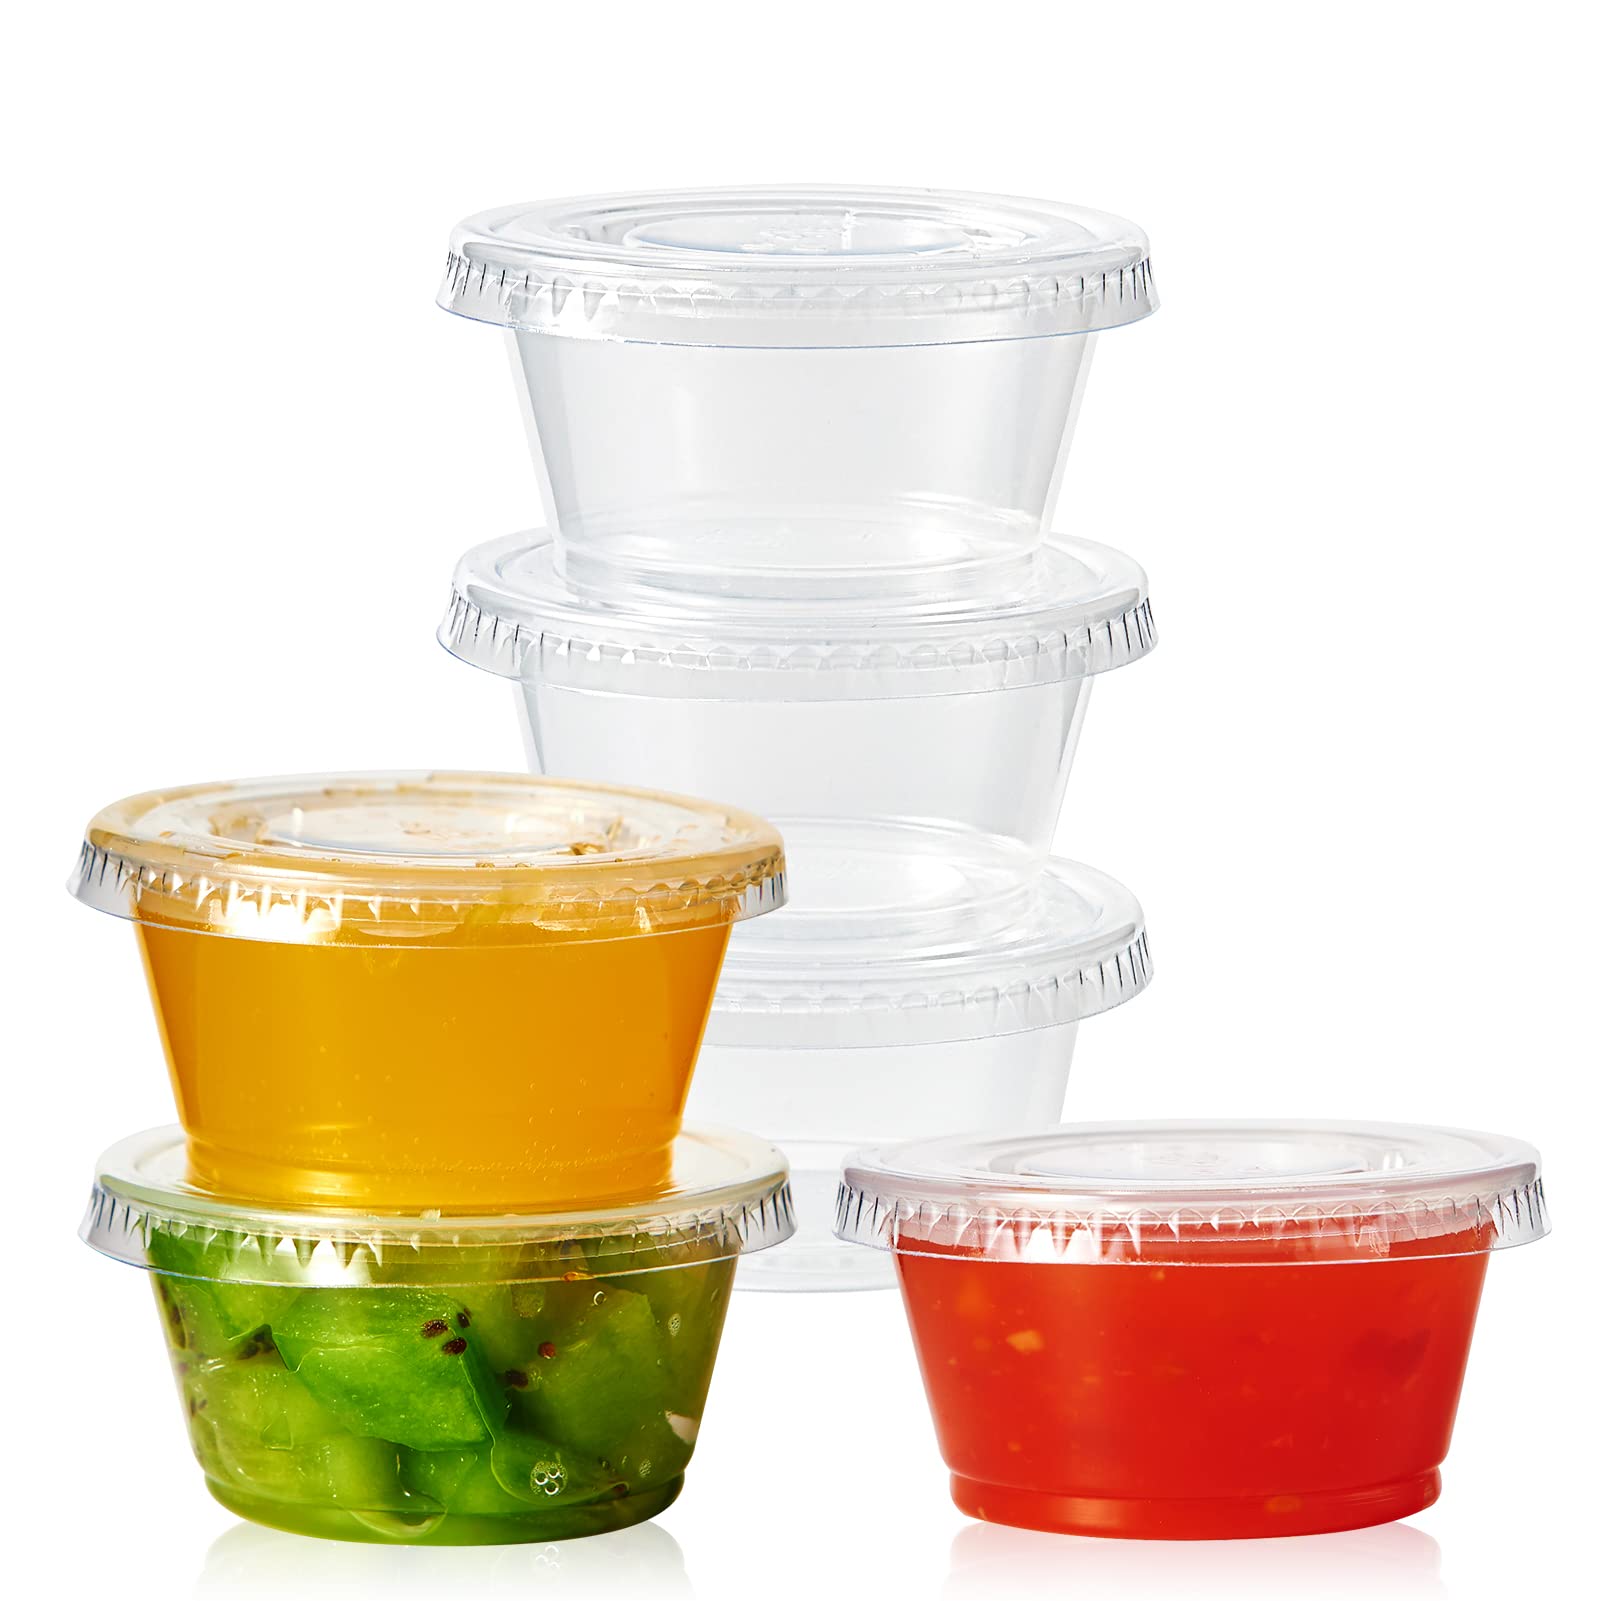 Clear Disposable Plastic Portion Cups with Leakproof Lids Jello Shot Cups  Condiment and Dipping Sauce Cups Souffle Cups - China Sauce Cups and PP Cups  price